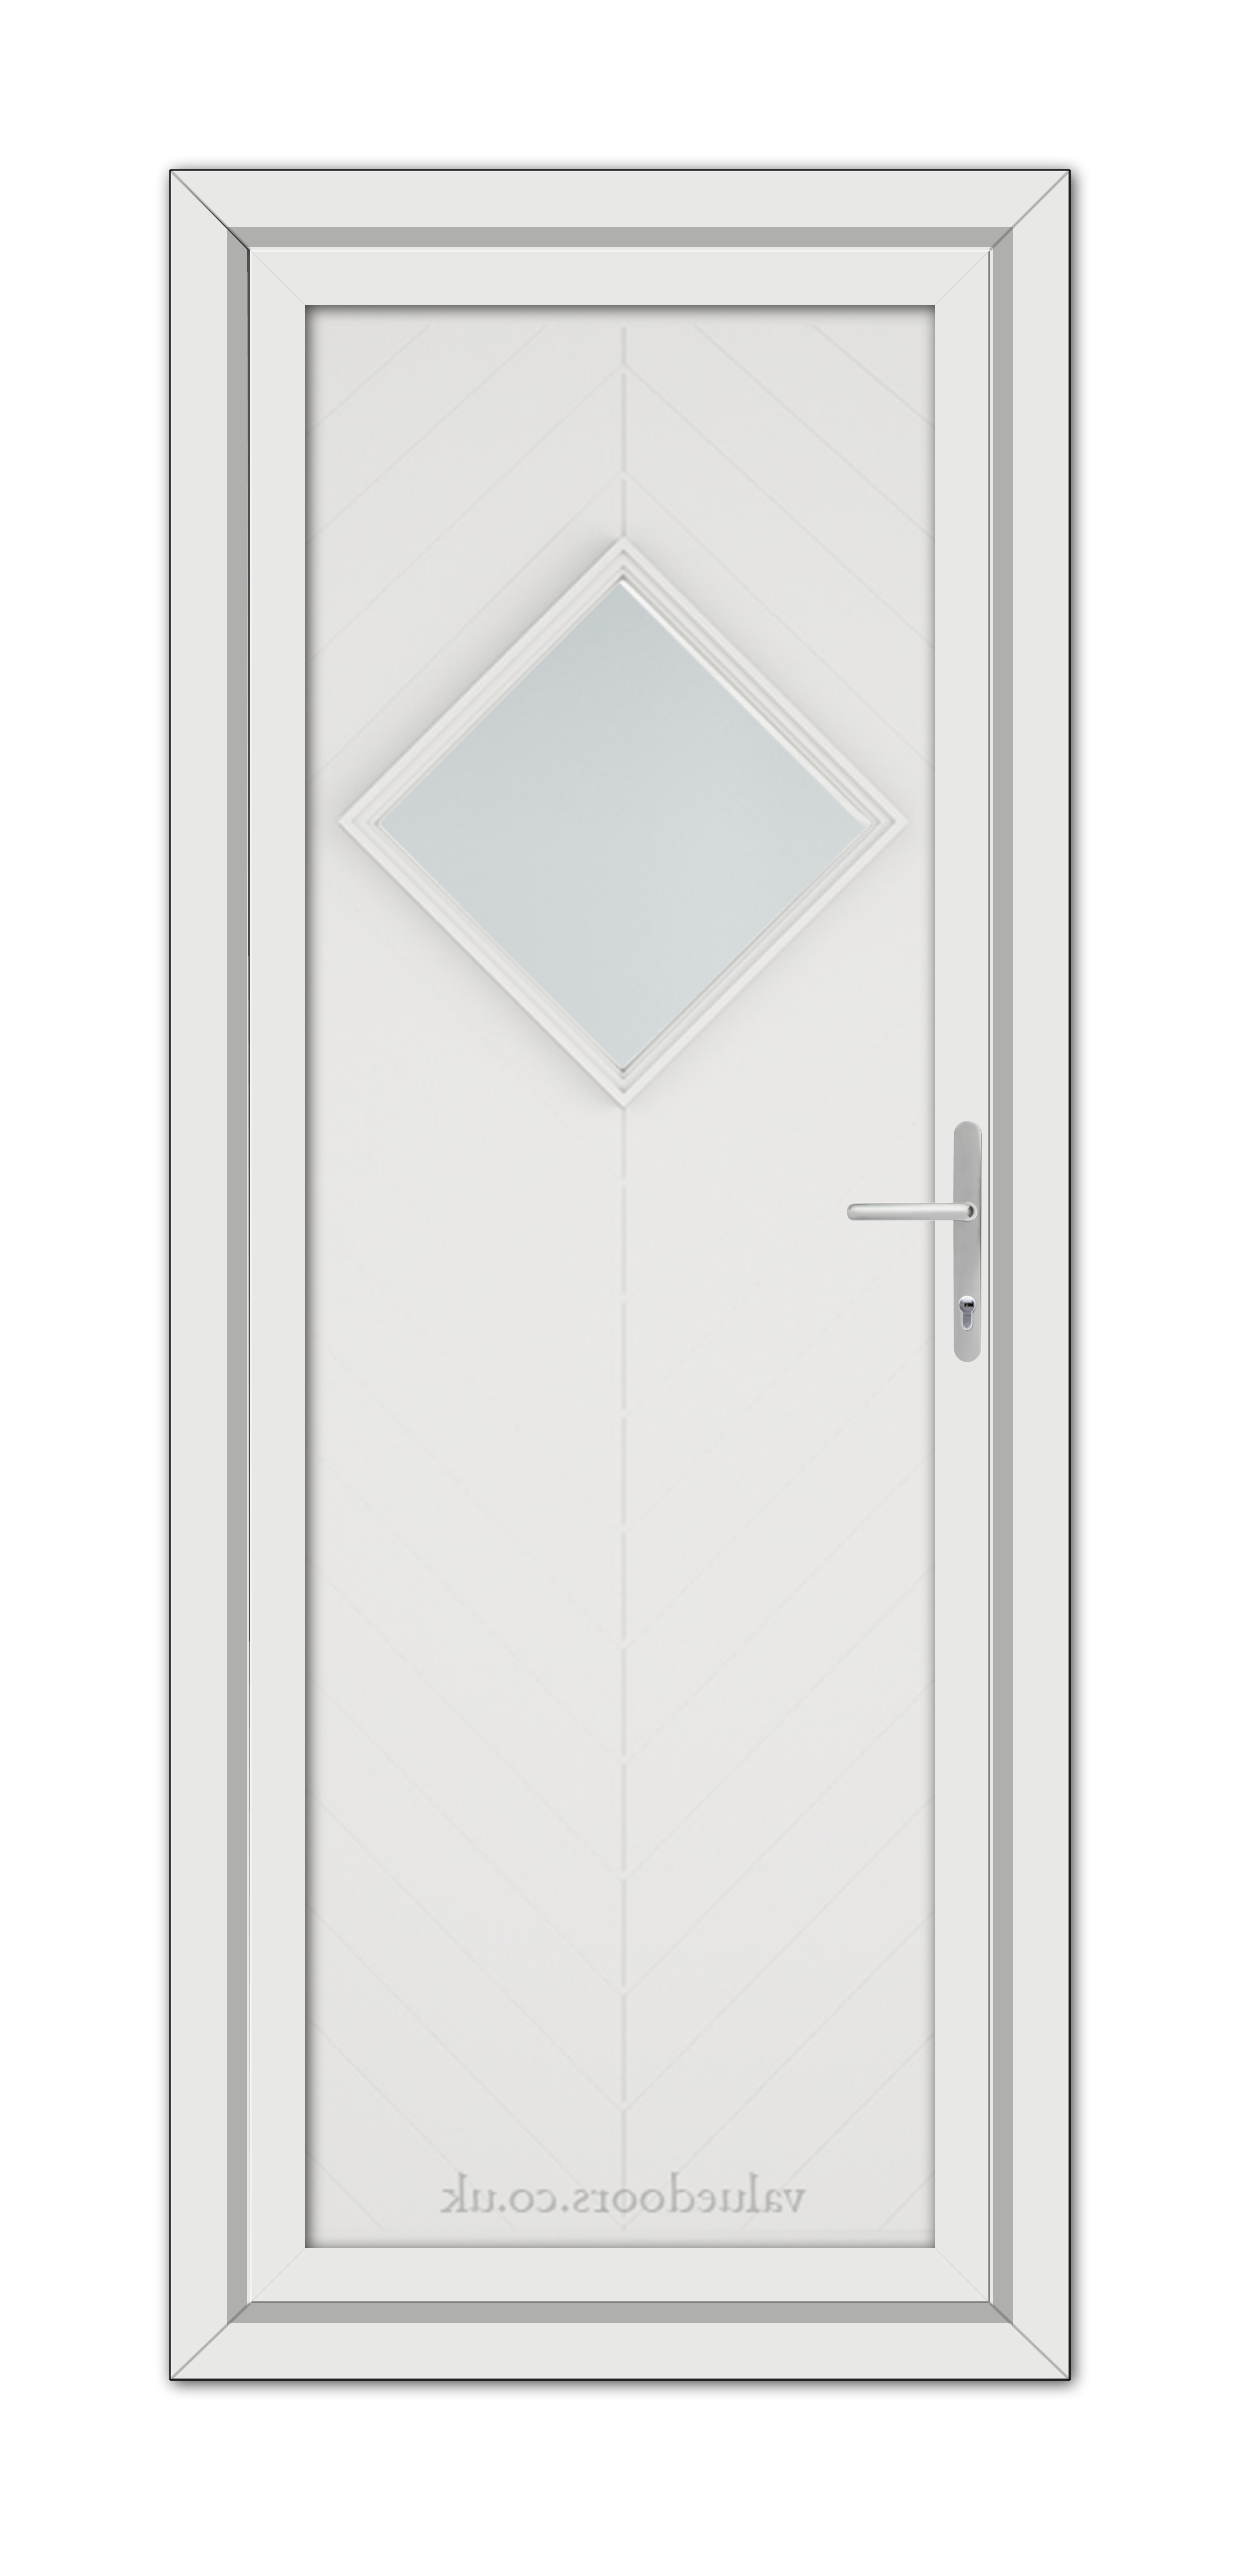 A vertical image of a modern White Hamburg uPVC Door featuring a diamond-shaped glass window at the top and a metallic handle on the right.